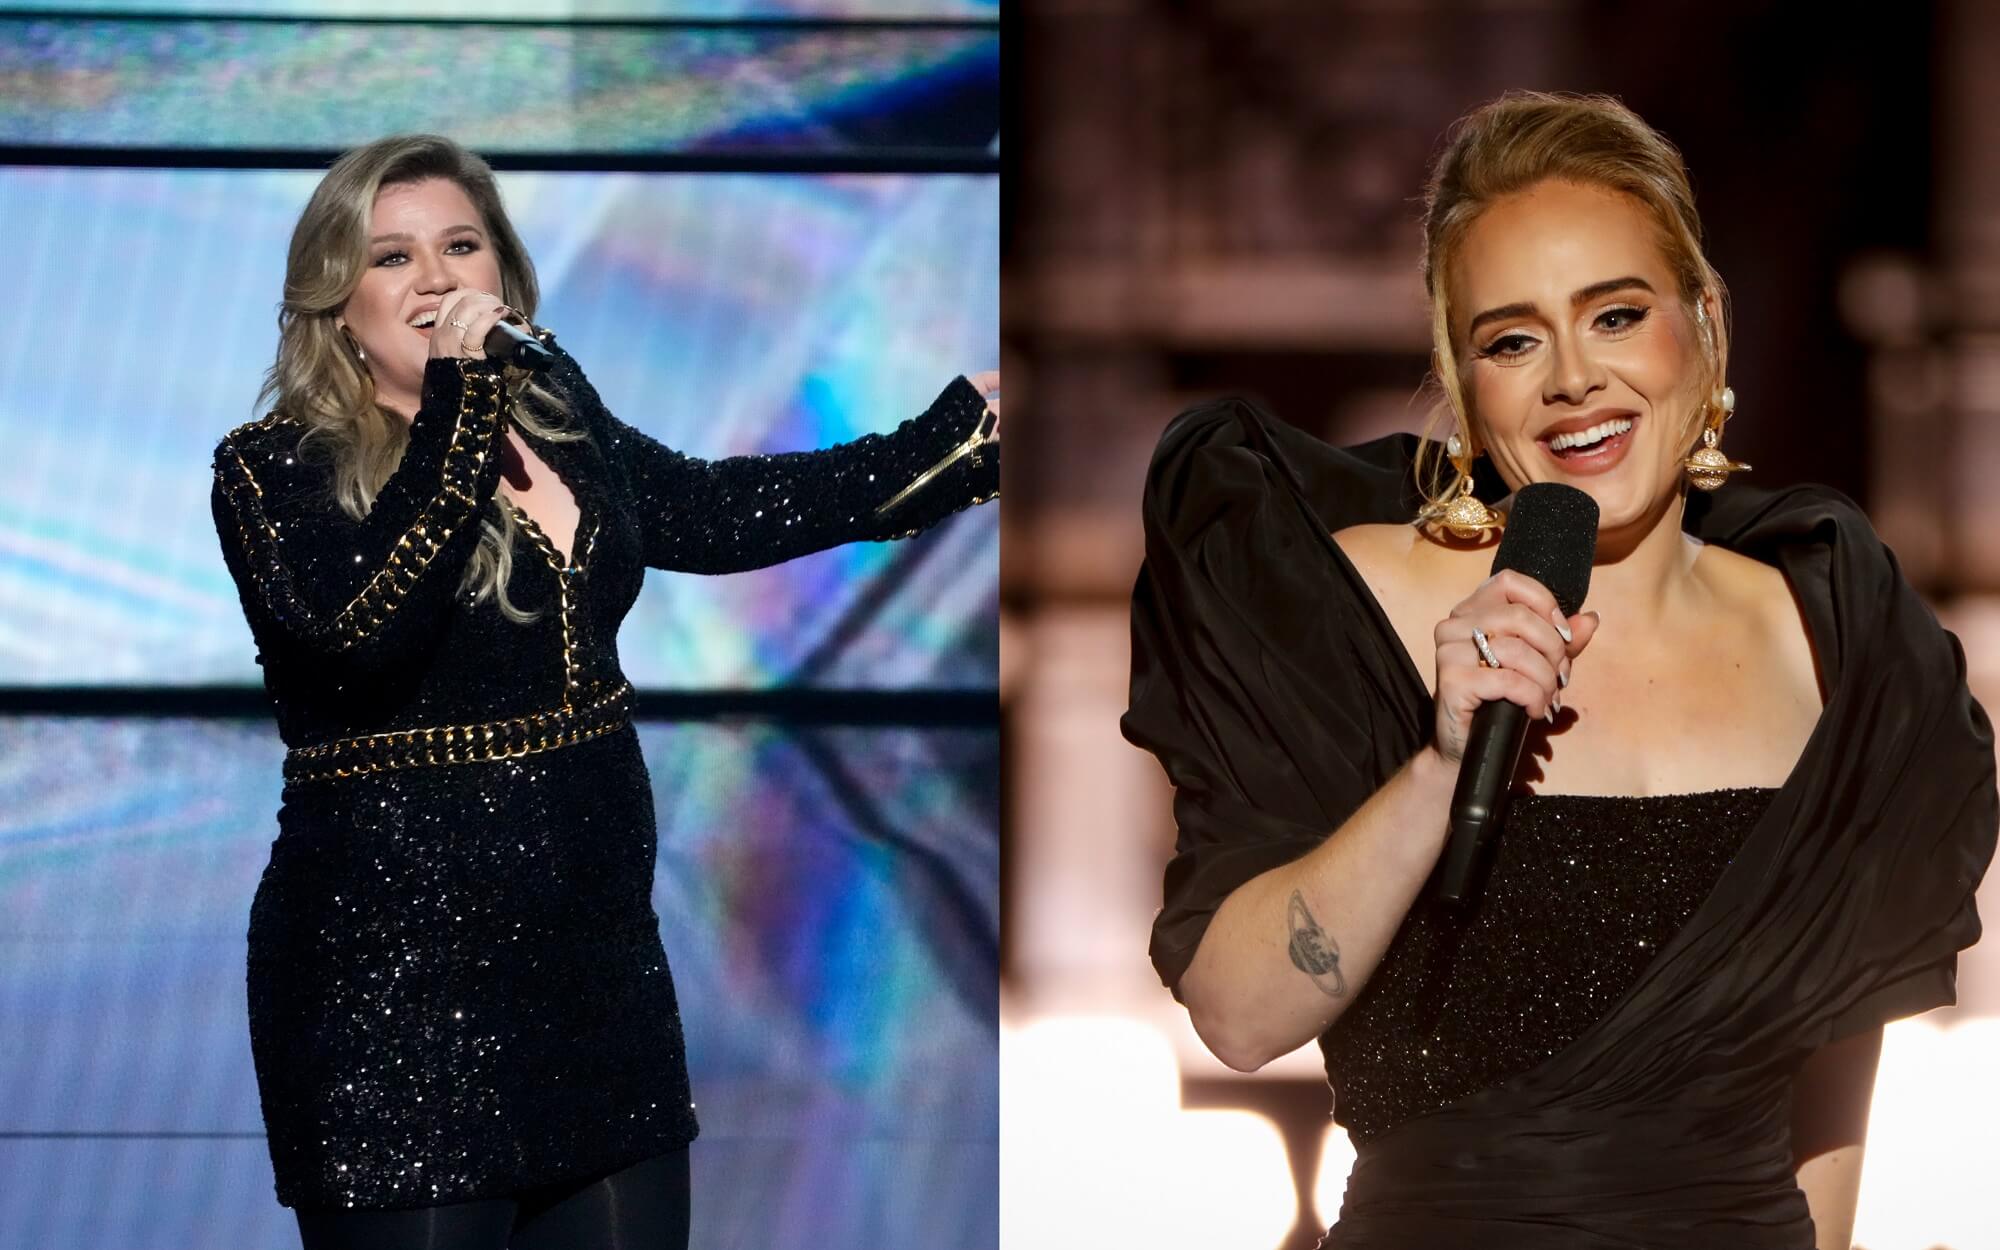 A joined photo of Kelly Clarkson and Adele